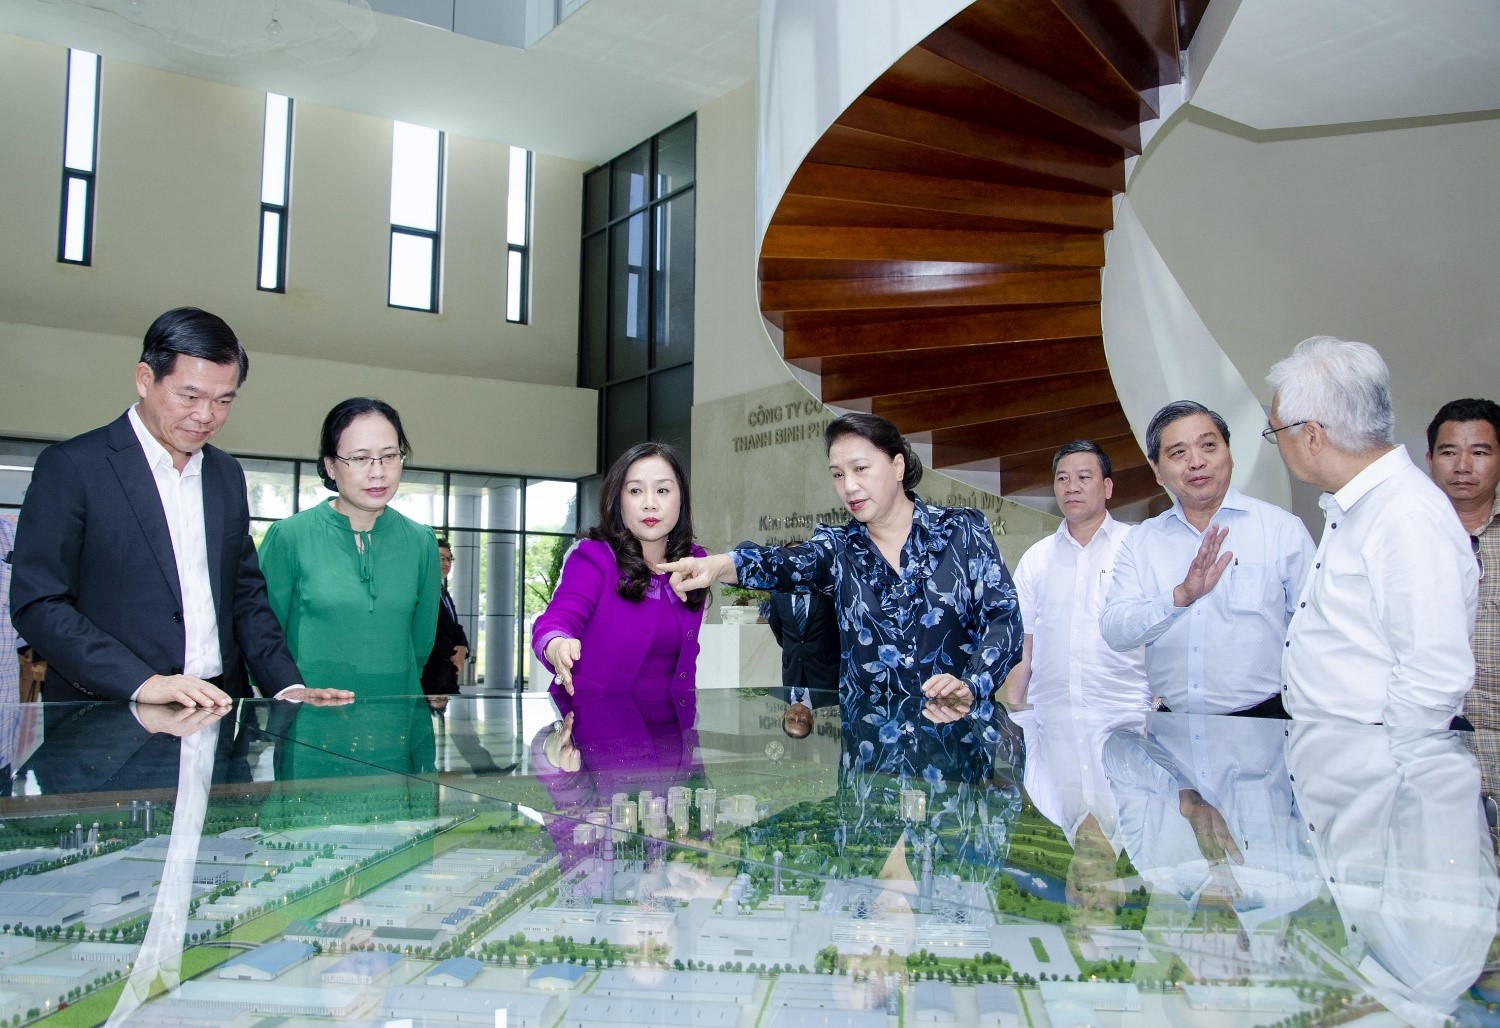 CHAIRWOMAN OF THE NATIONAL ASSEMBLY NGUYEN THI KIM NGAN WORKED WITH THANH BINH PHU MY JSC